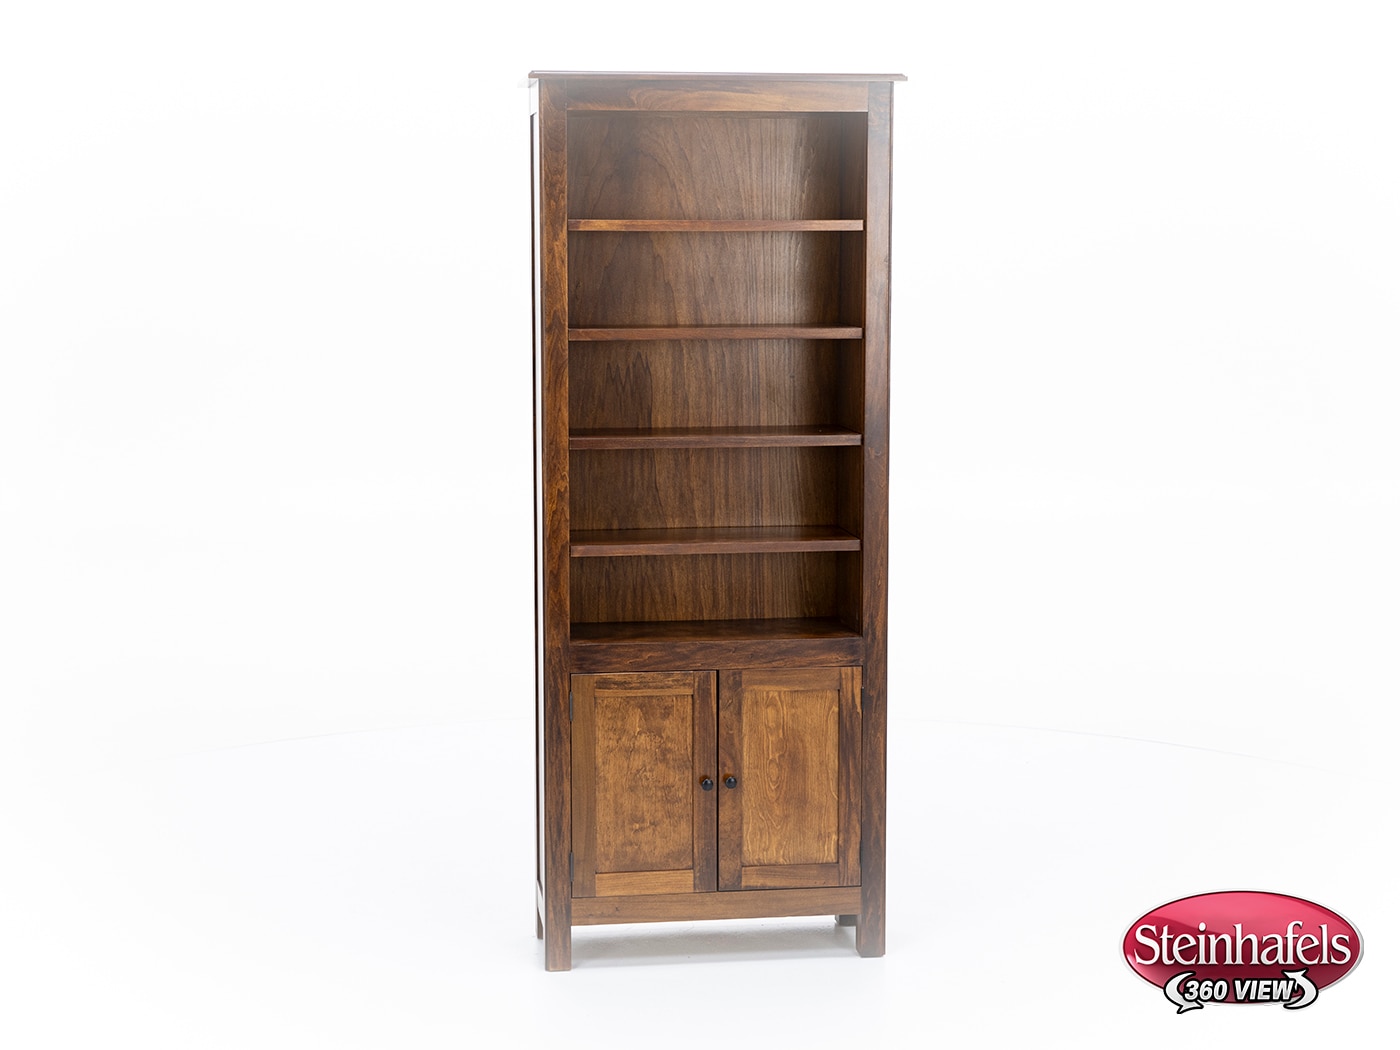 witmer furniture brown bookcase  image tylr  